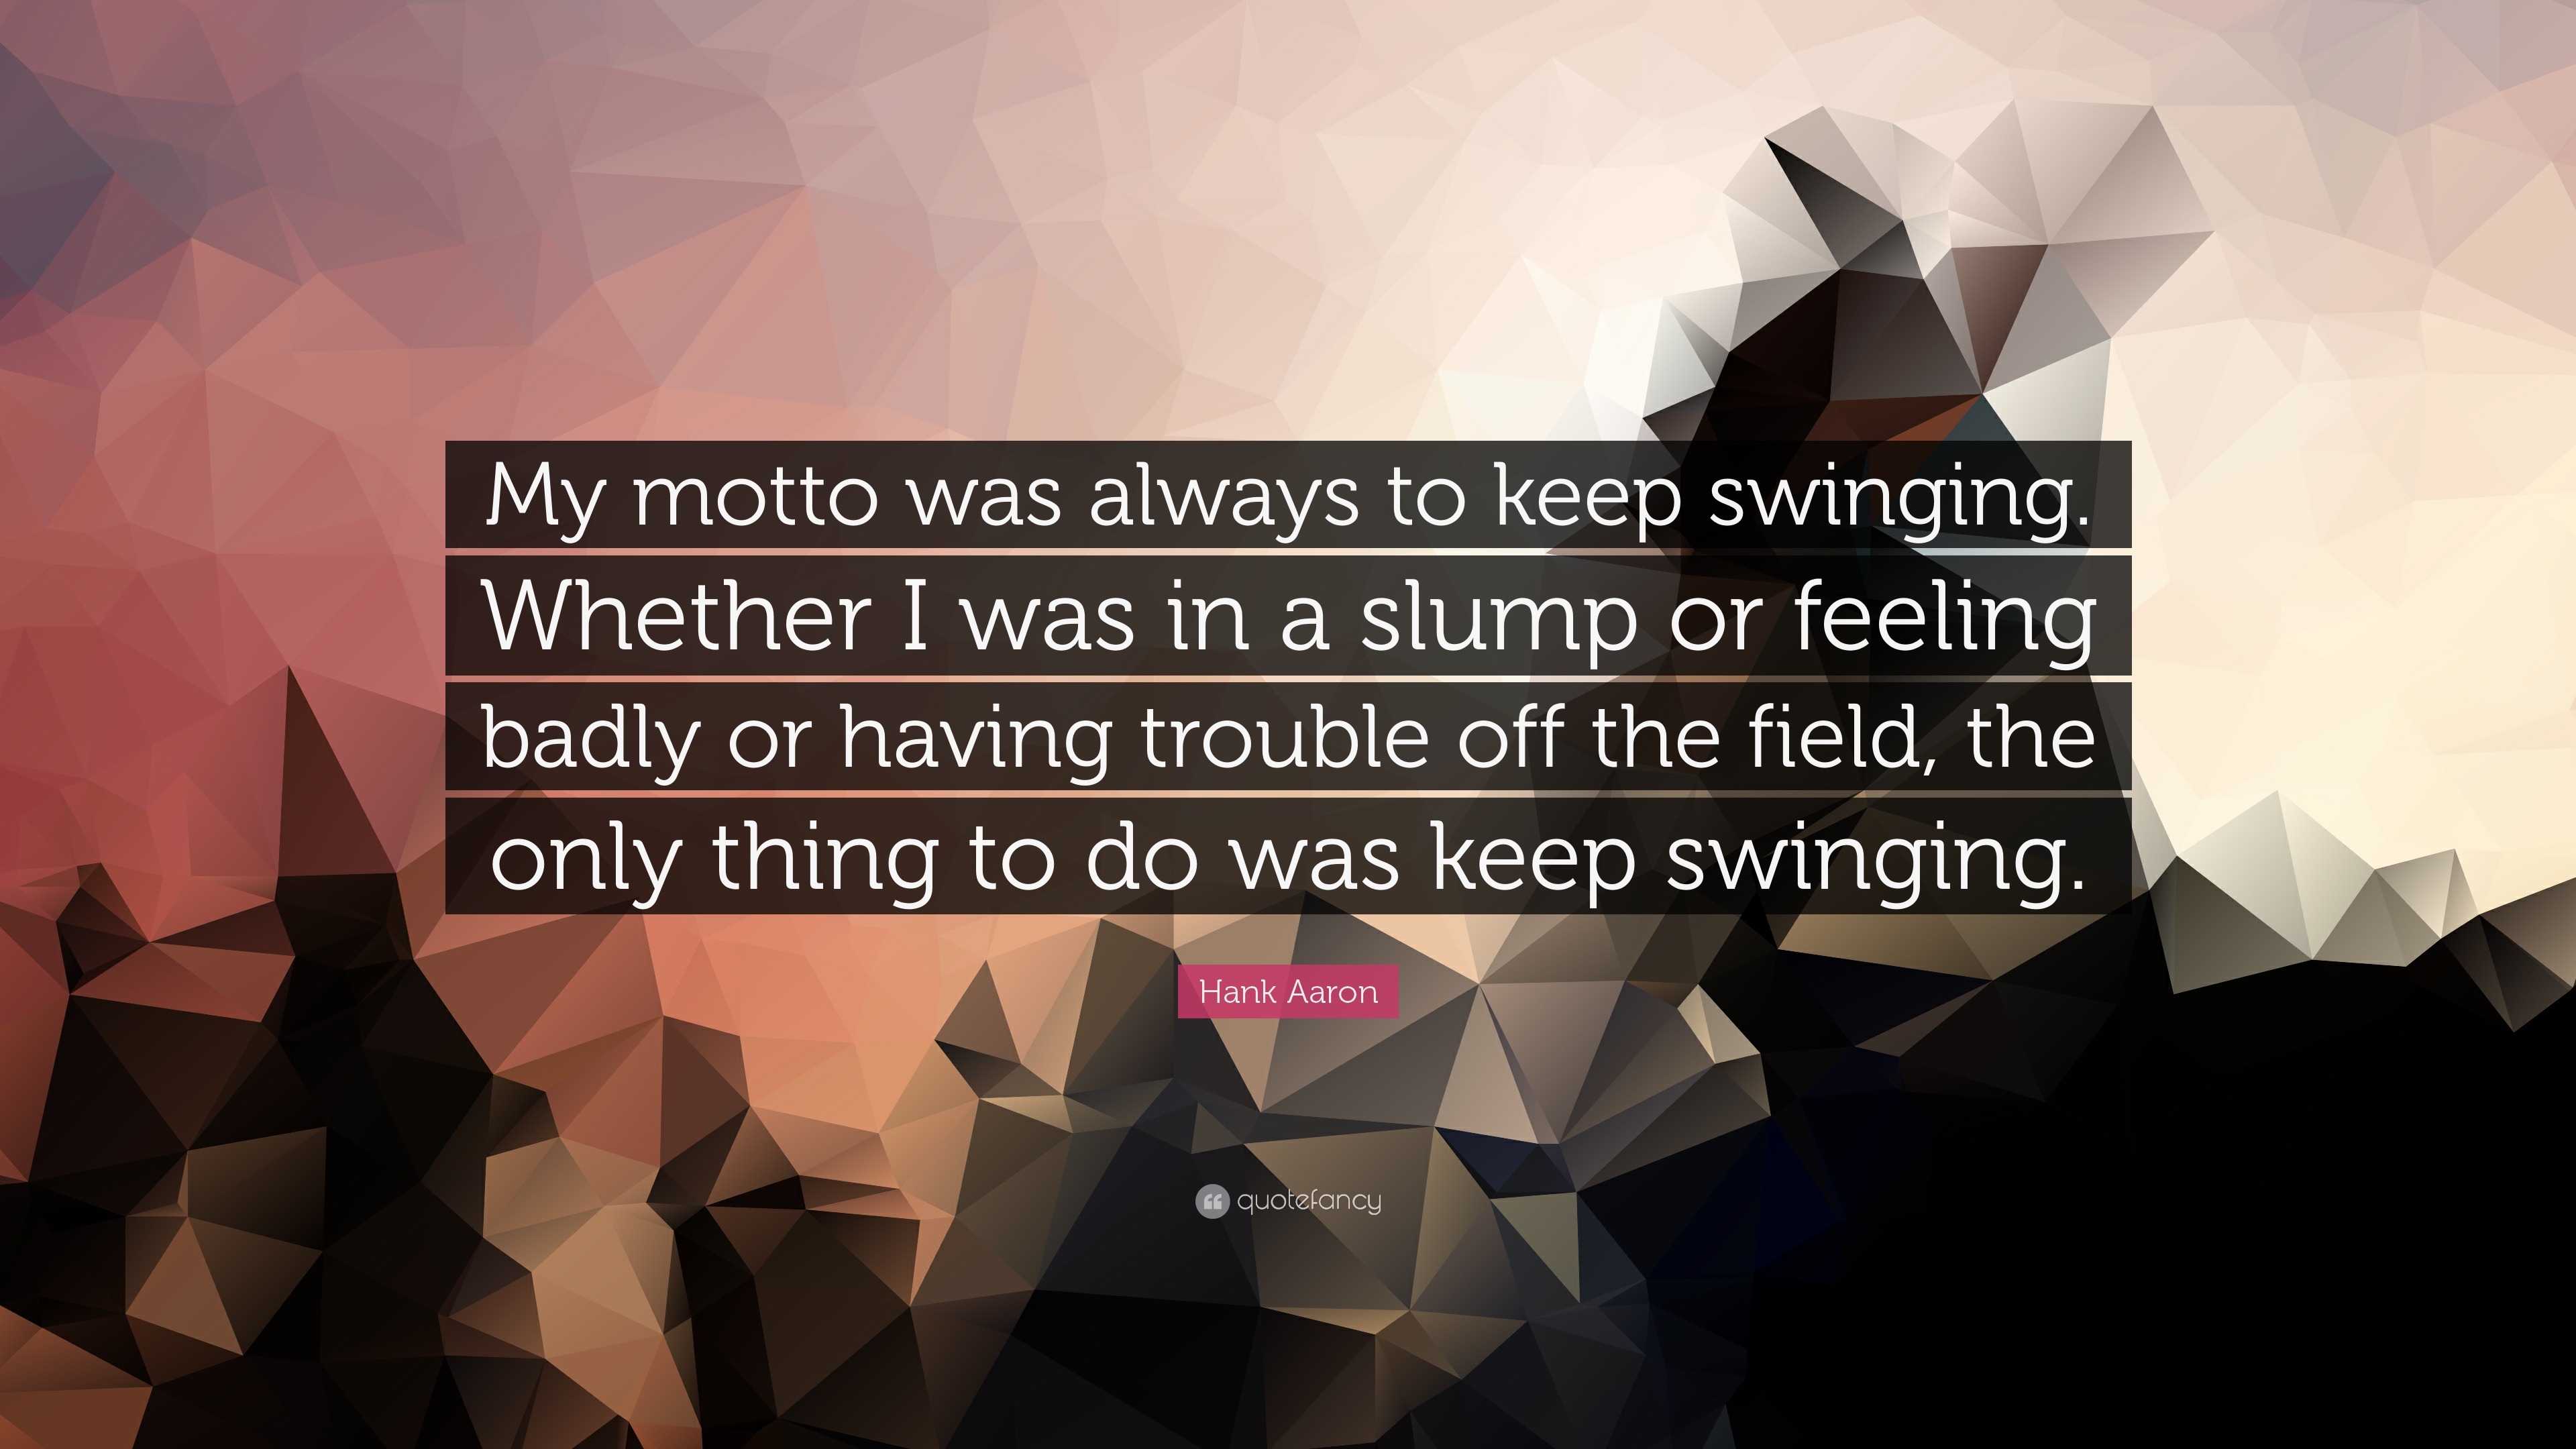 My motto was always to keep swinging. - Quote